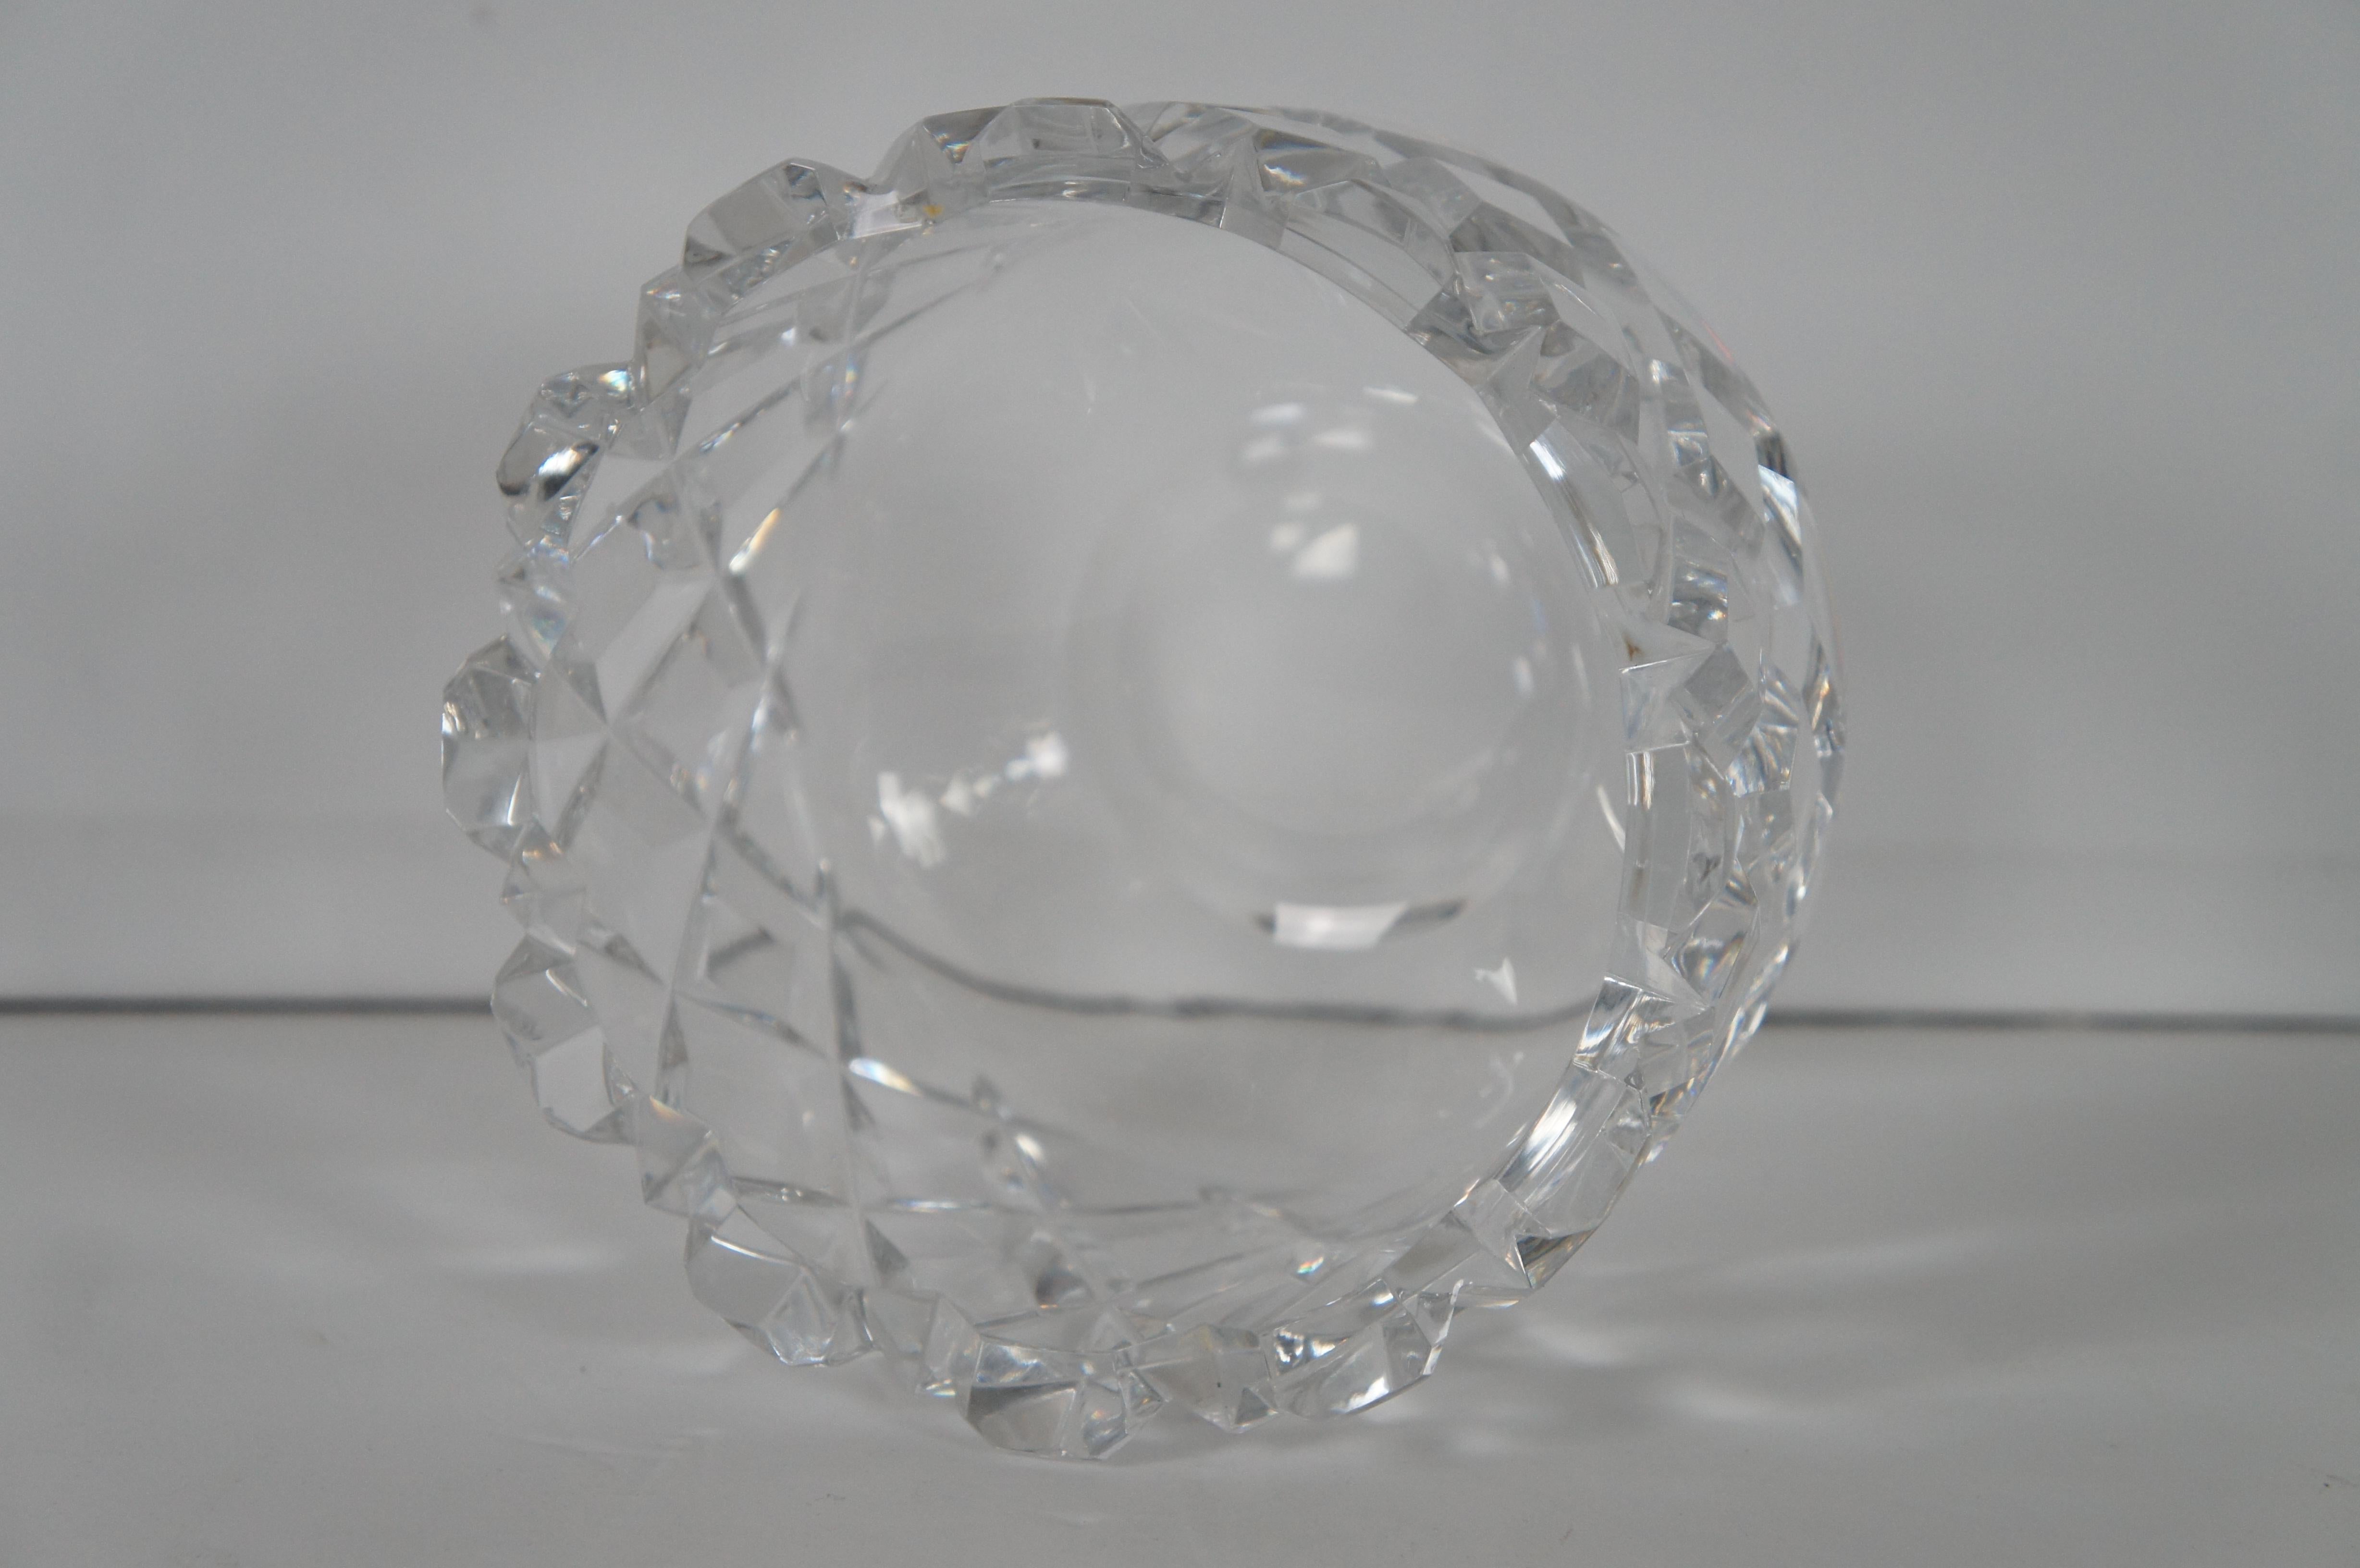 Vintage Orrefors Sofiero by Gunnar Cyren Cut Crystal Bowl Dish Signed #3834-121 In Good Condition For Sale In Dayton, OH